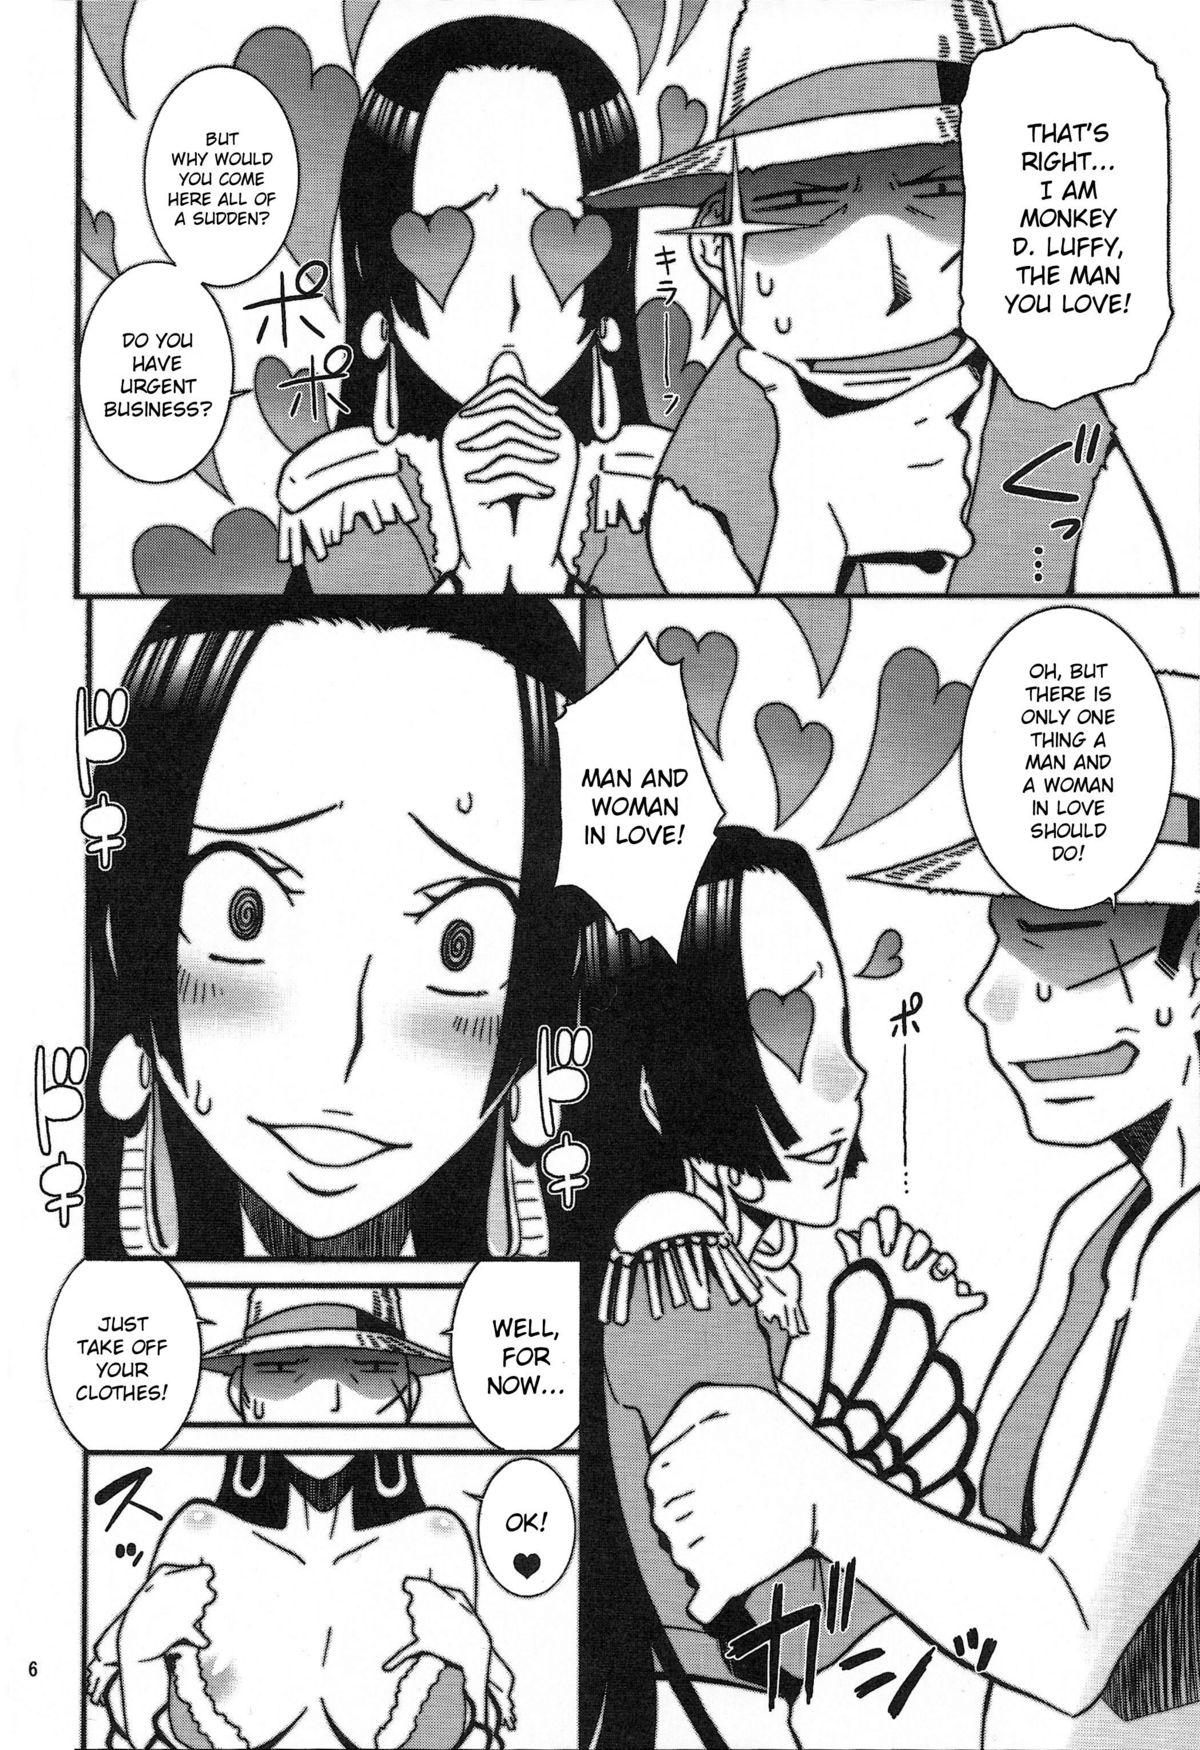 Fitness NyanNyan Hebihime 2 - One piece Housewife - Page 5